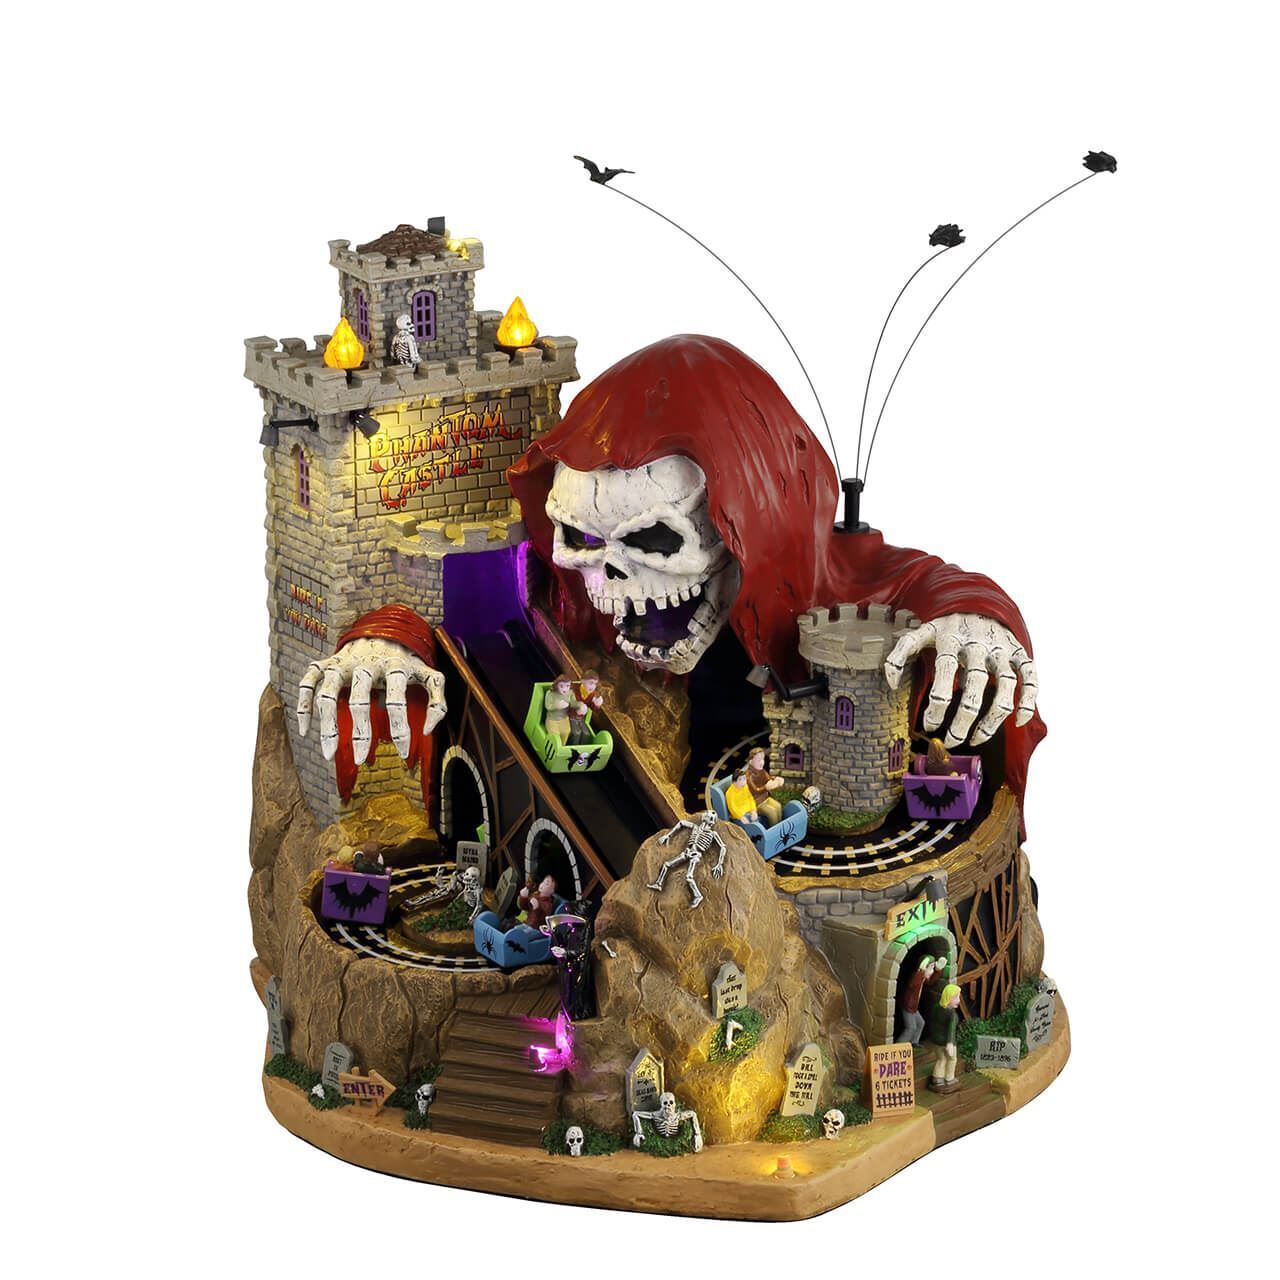 Lemax Spooky Town Halloween Village Phantom Castle with Scary Skeleton 45216